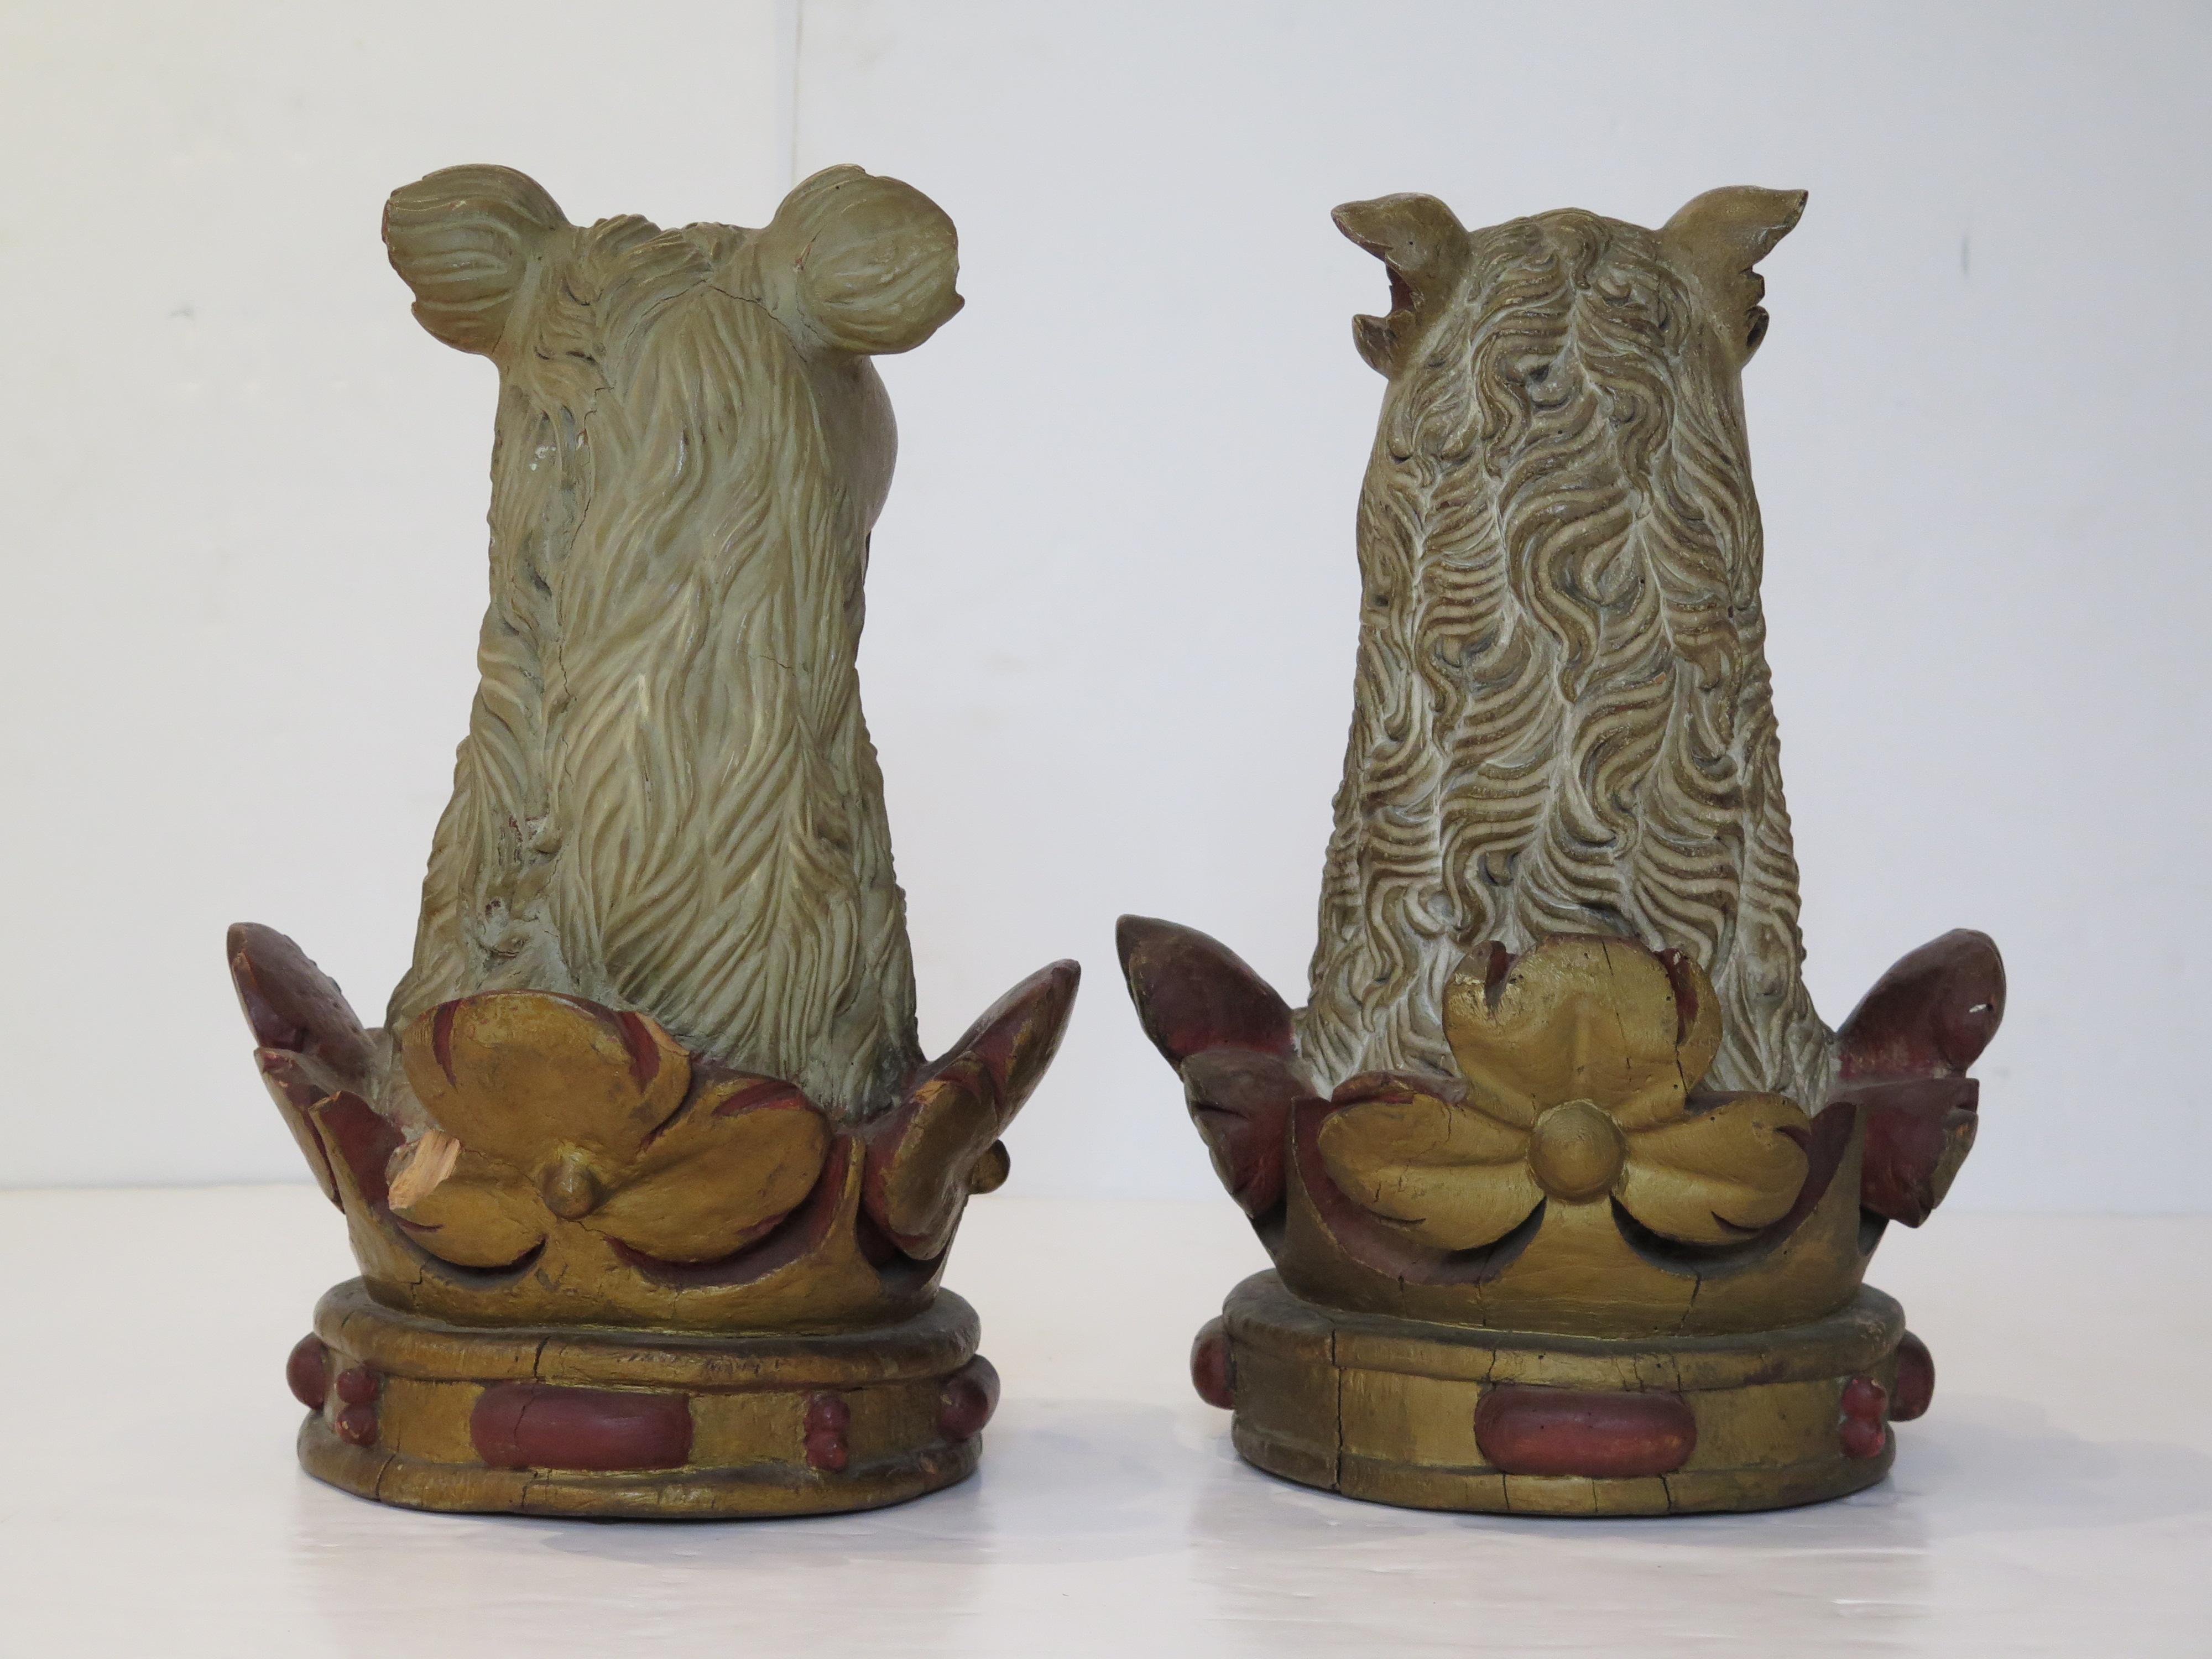 English Carved Wood Family Crests ''Out of a Ducal Coronet, Or, a Bear's Head Ppr.